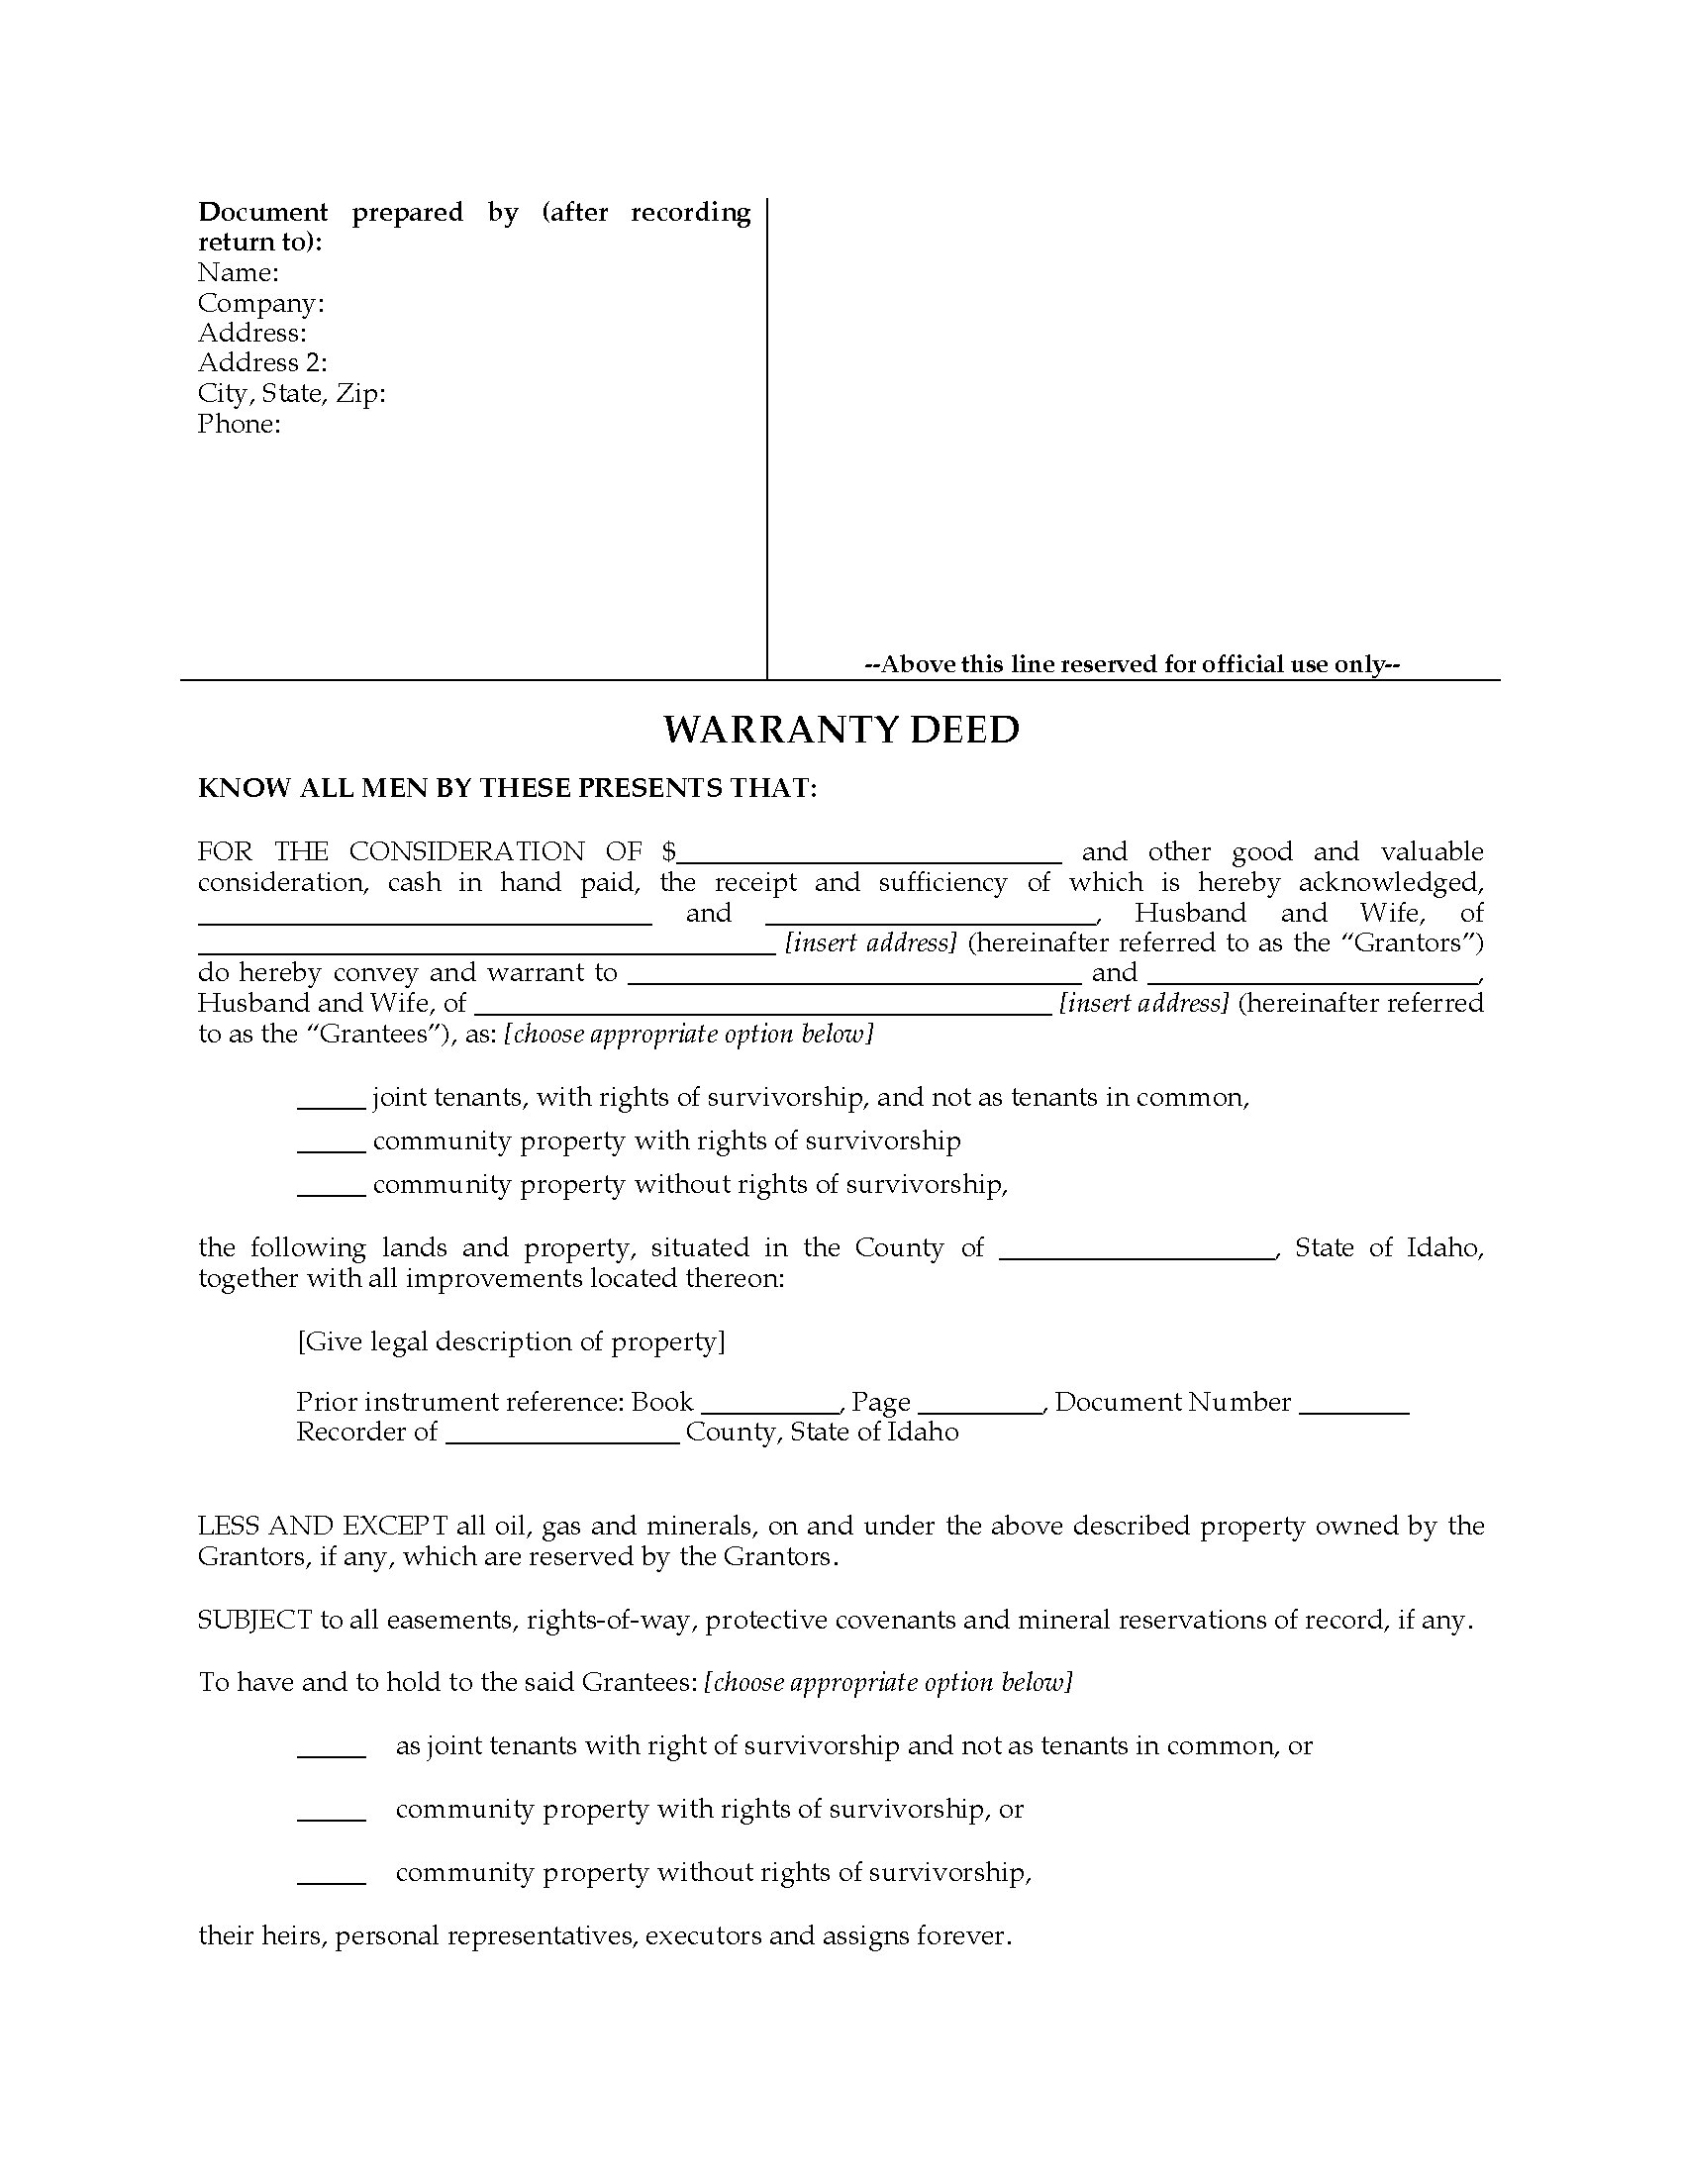 Idaho Warranty Deed For Joint Ownership | Legal Forms And Business With Joint Property Ownership Agreement Template